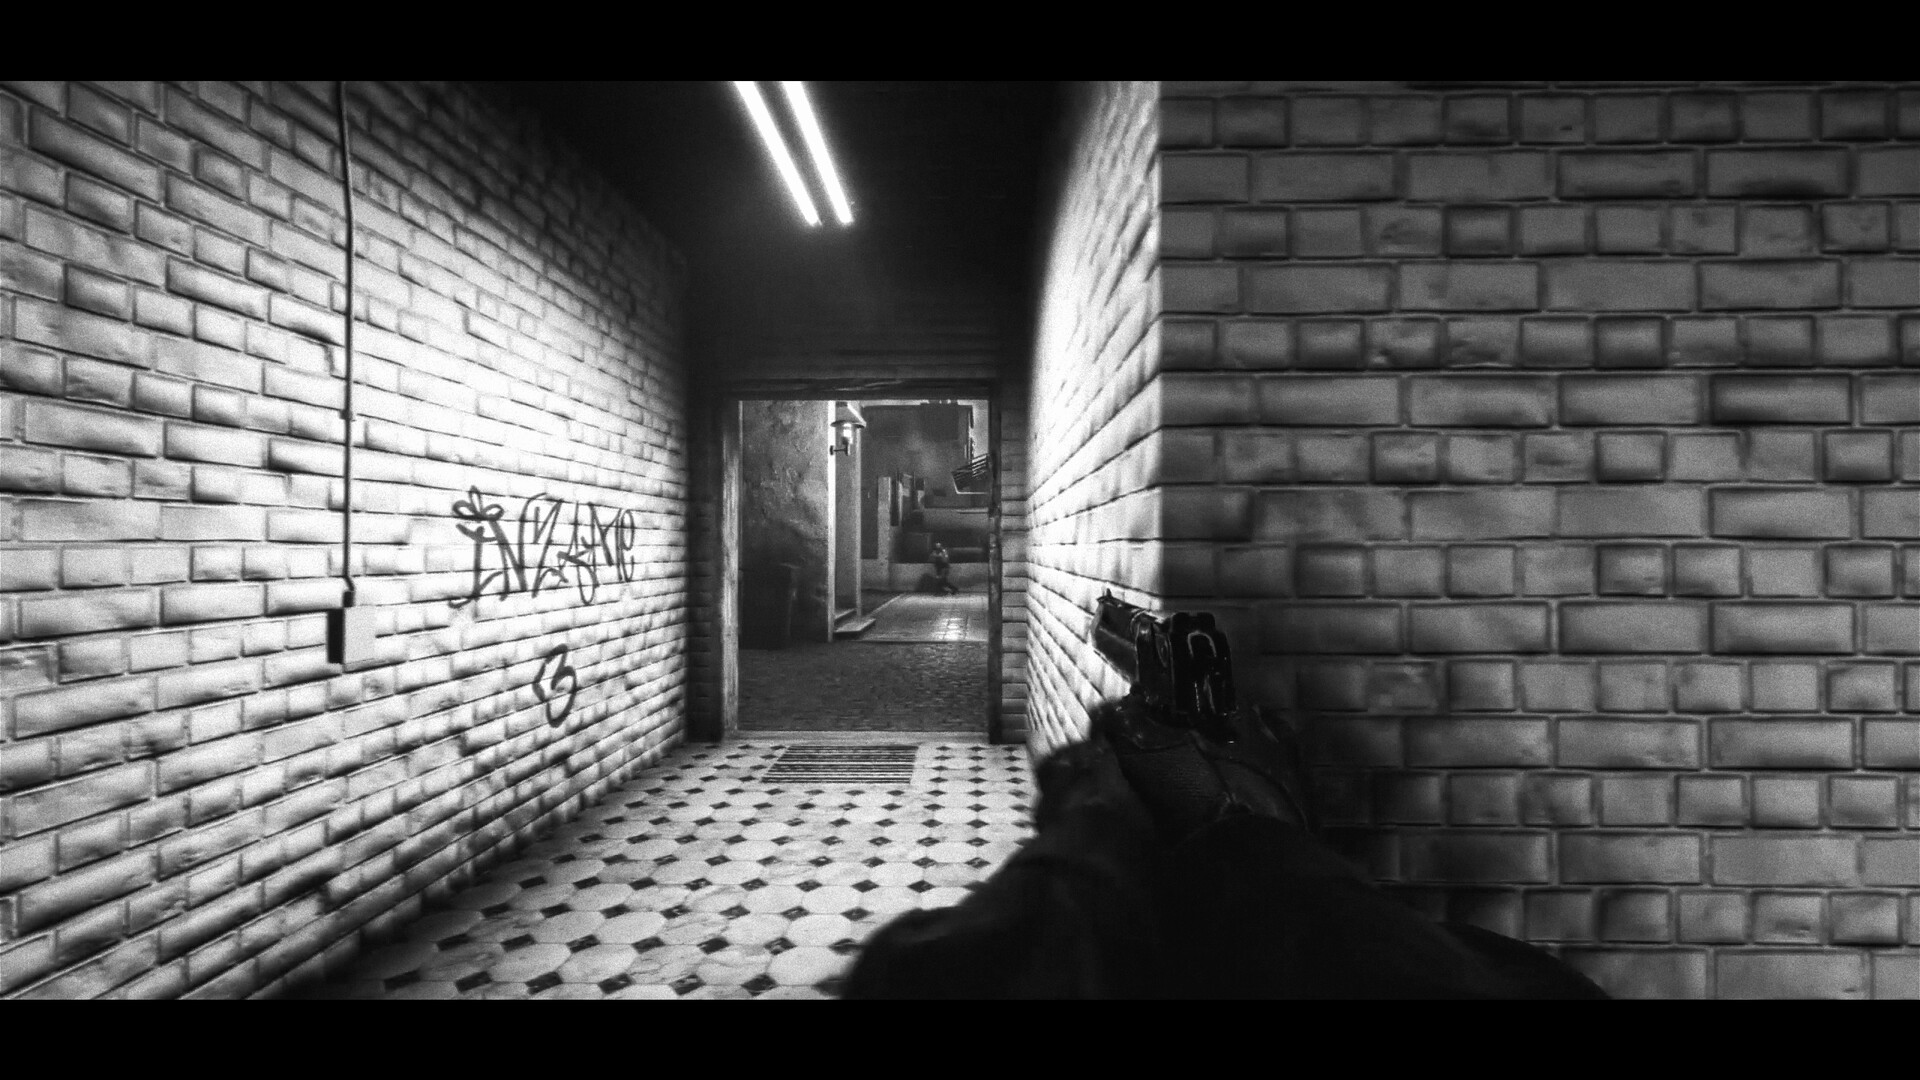 General 1920x1080 Counter-Strike: Global Offensive Counter-Strike: Global Offensive Map PC gaming screen shot monochrome